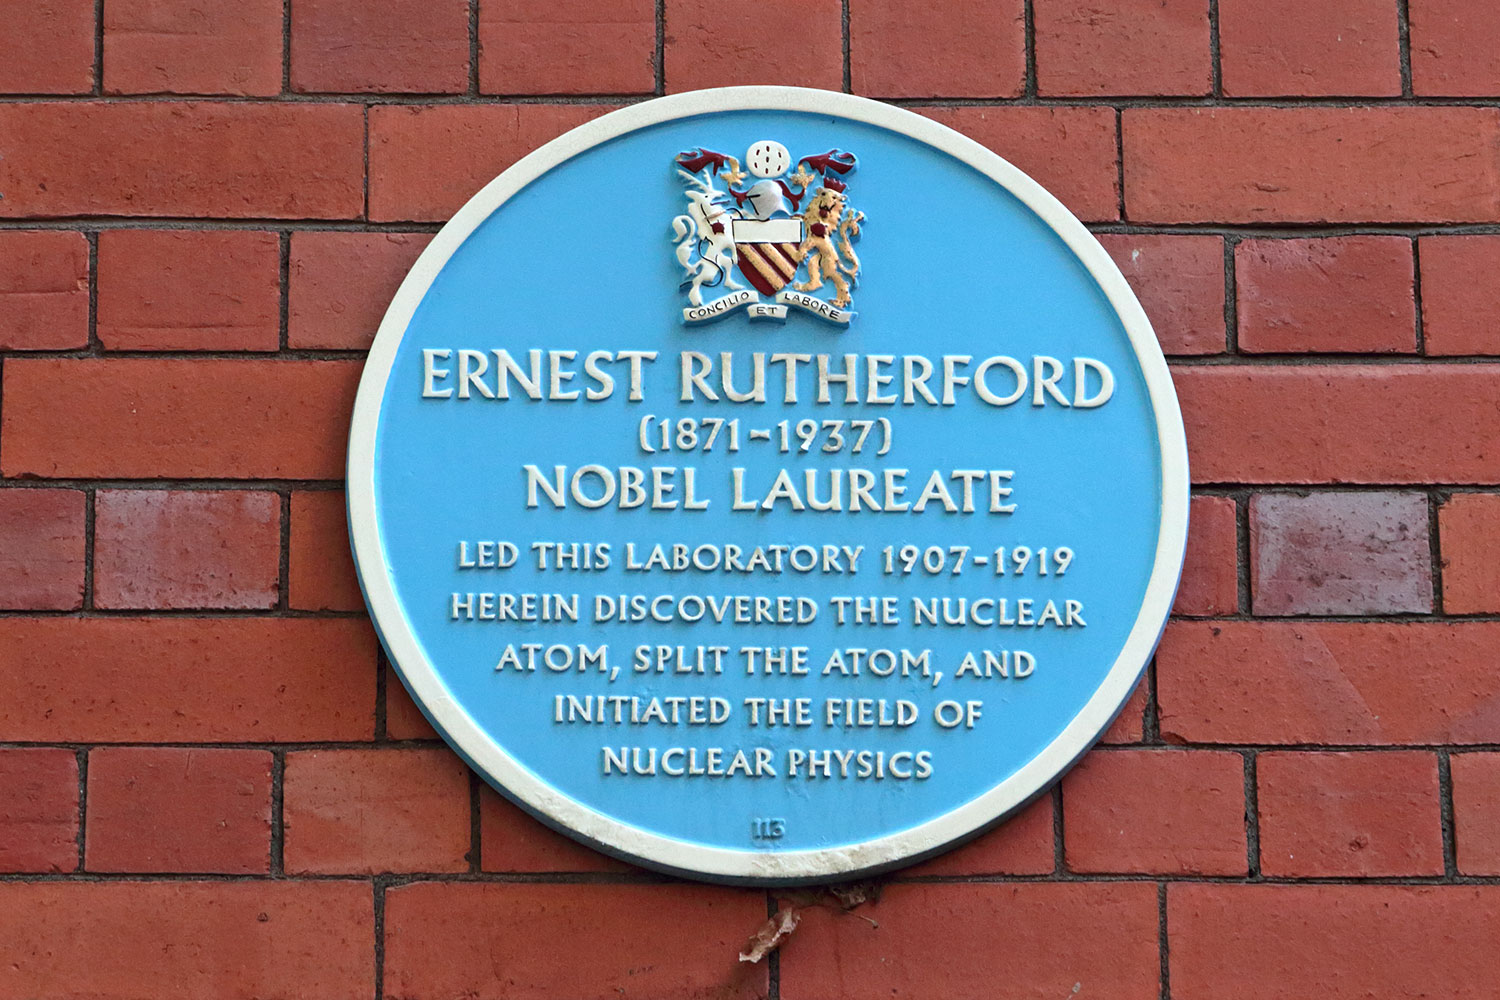 Ernest Rutherford blue plaque in Manchester